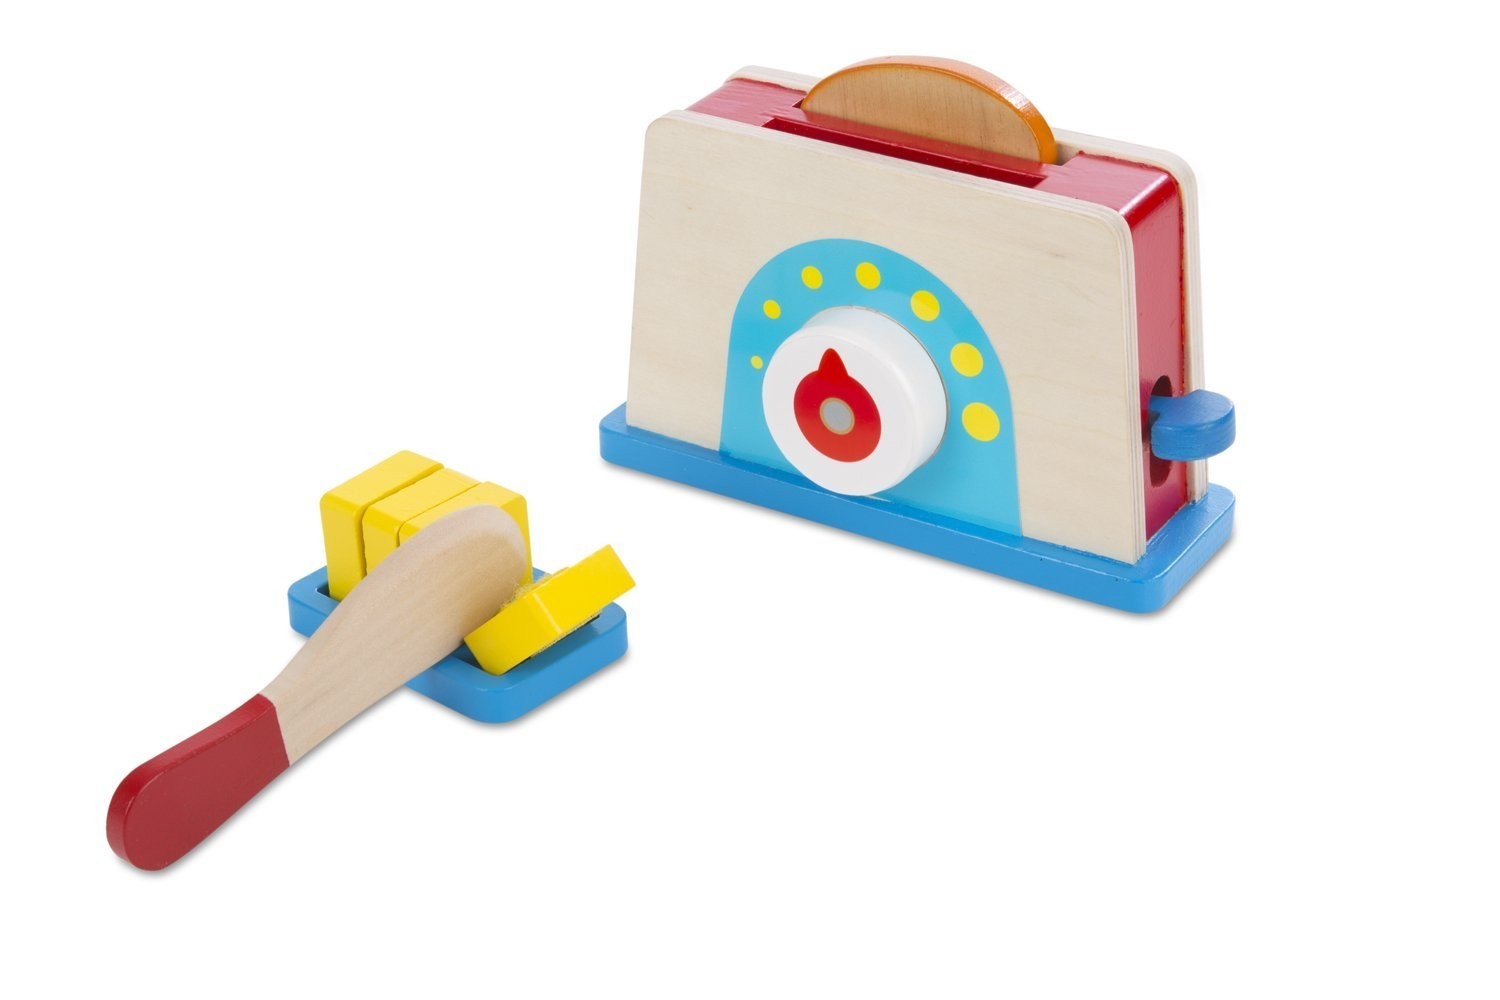 Bread & Butter Toaster Set